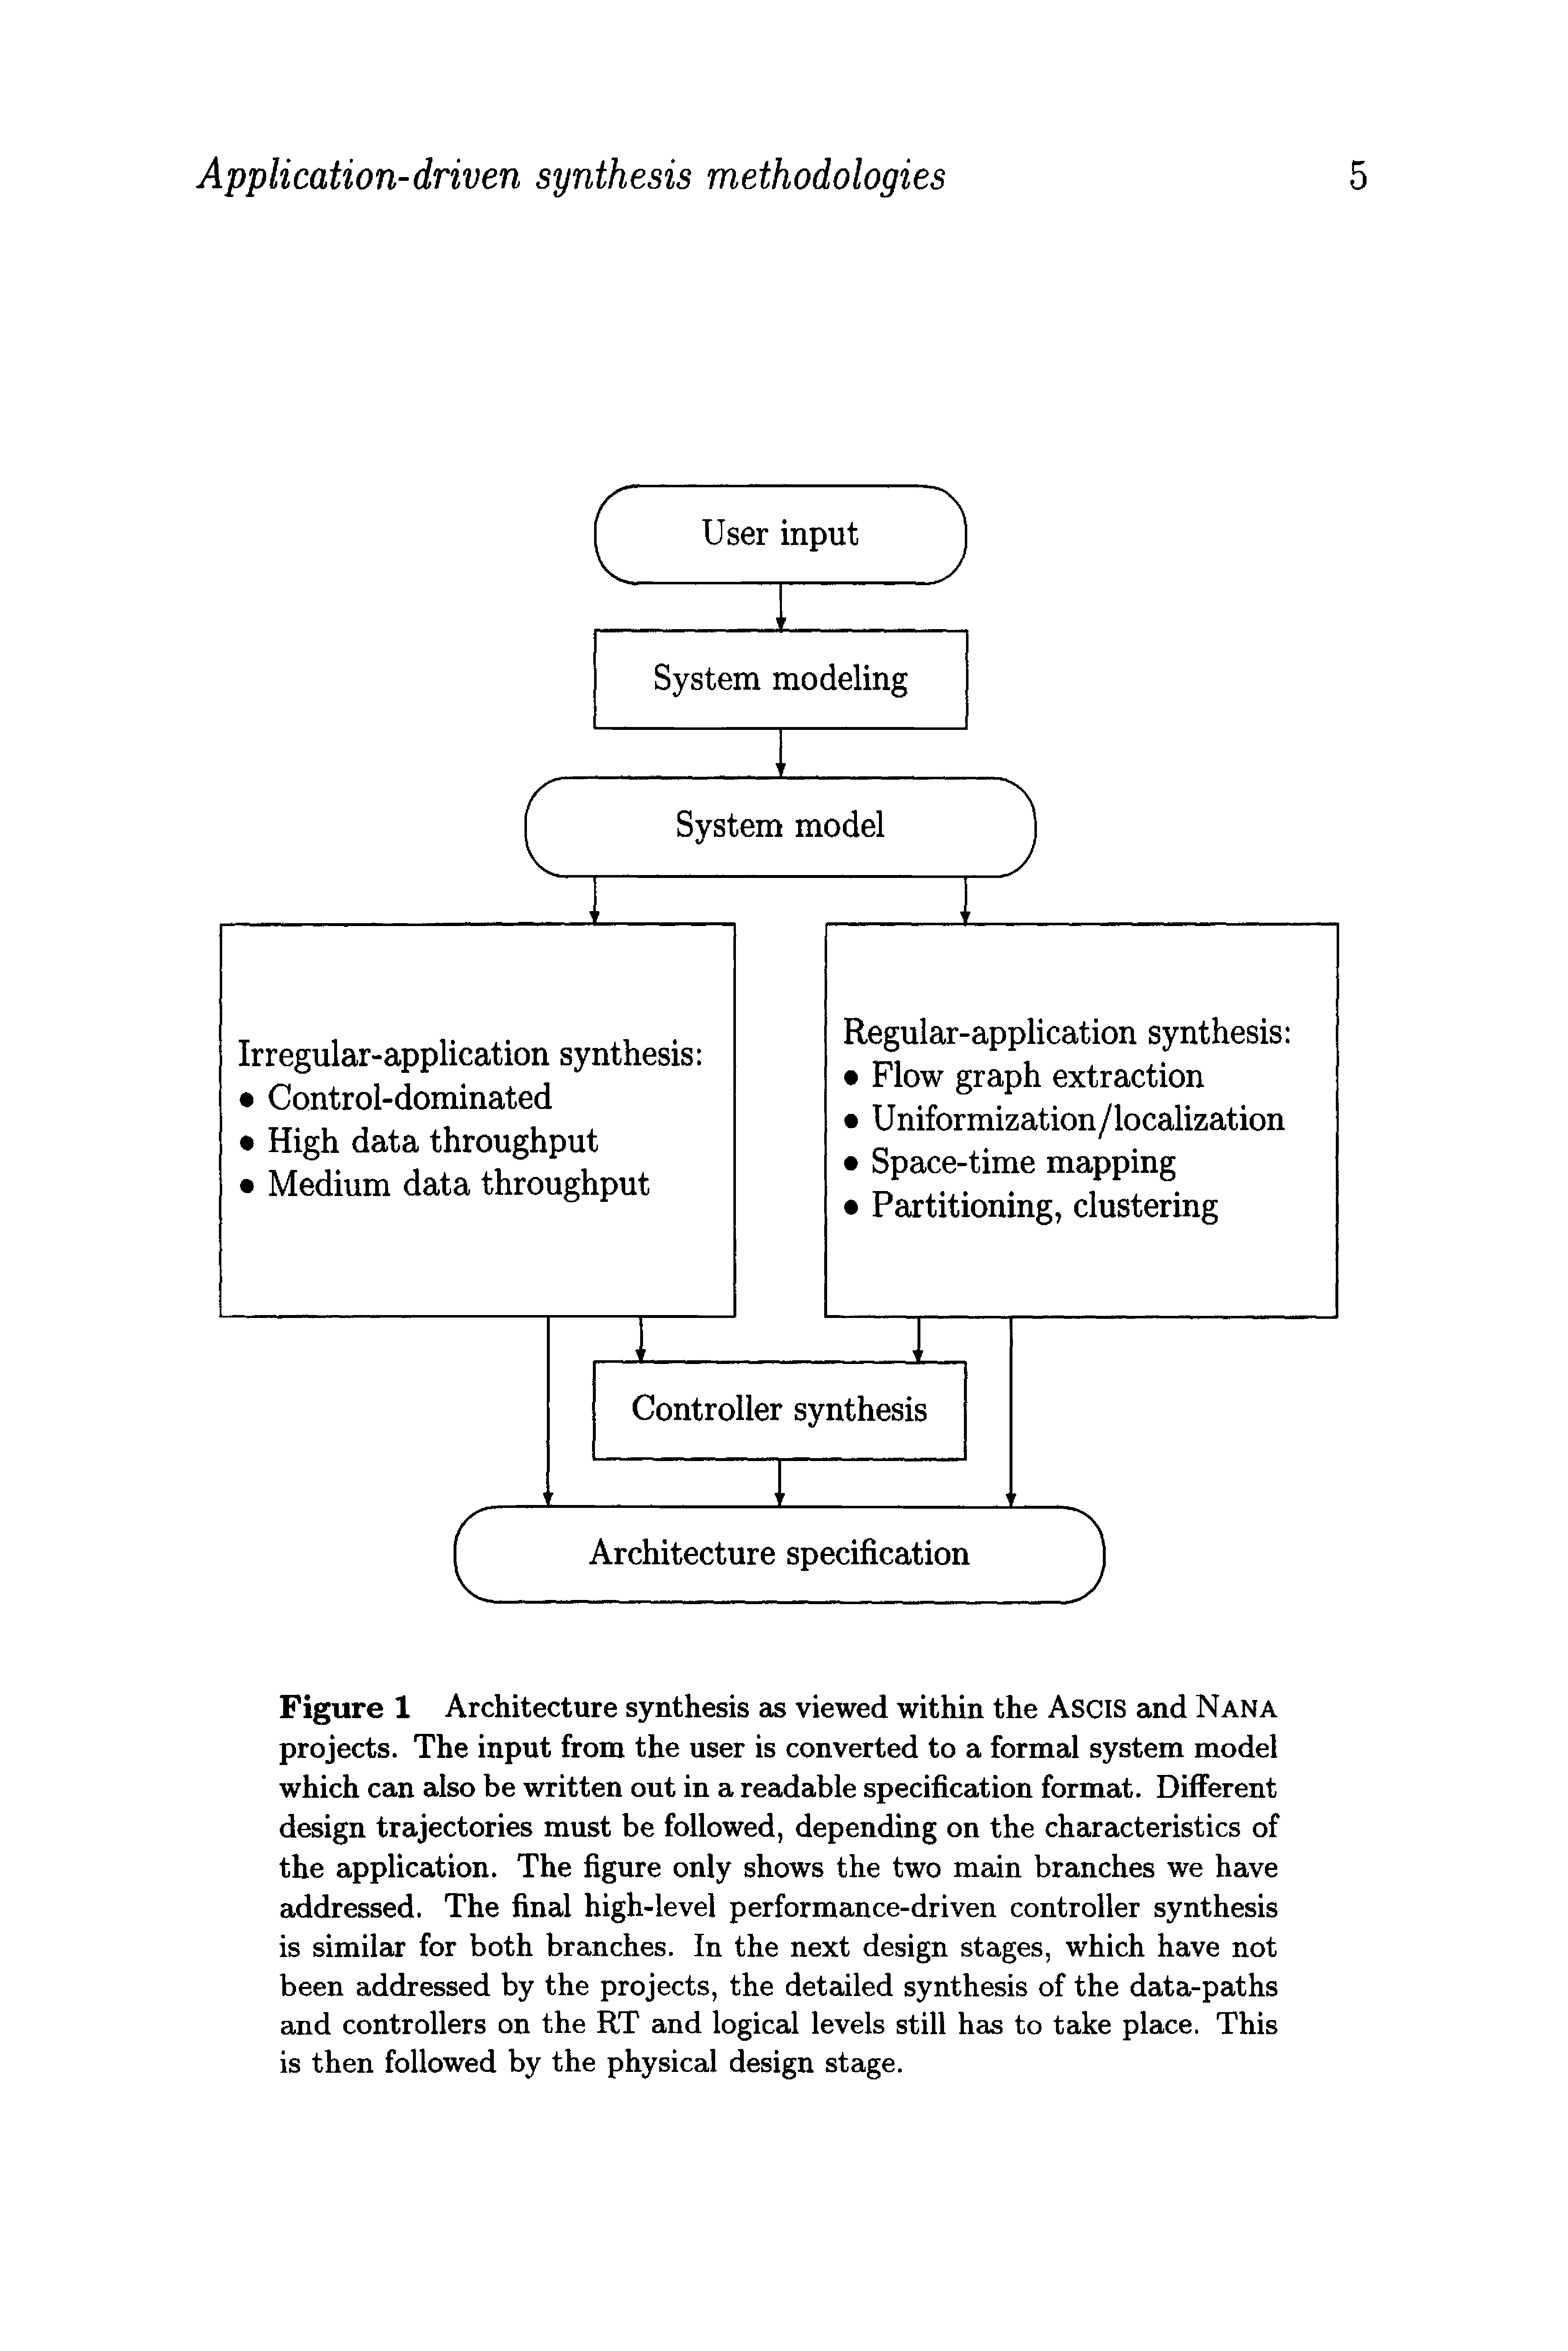 Figure 1 Architecture synthesis as viewed within the Ascis and Nana projects. The input from the user is converted to a formal system model which can also be written out in a readable specification format. Different design trajectories must be followed, depending on the characteristics of the application. The figure only shows the two main branches we have addressed. The final high-level performance-driven controller synthesis is similar for both branches. In the next design stages, which have not been addressed by the projects, the detailed synthesis of the data-paths and controllers on the RT and logical levels still has to take place. This is then followed by the physical design stage.